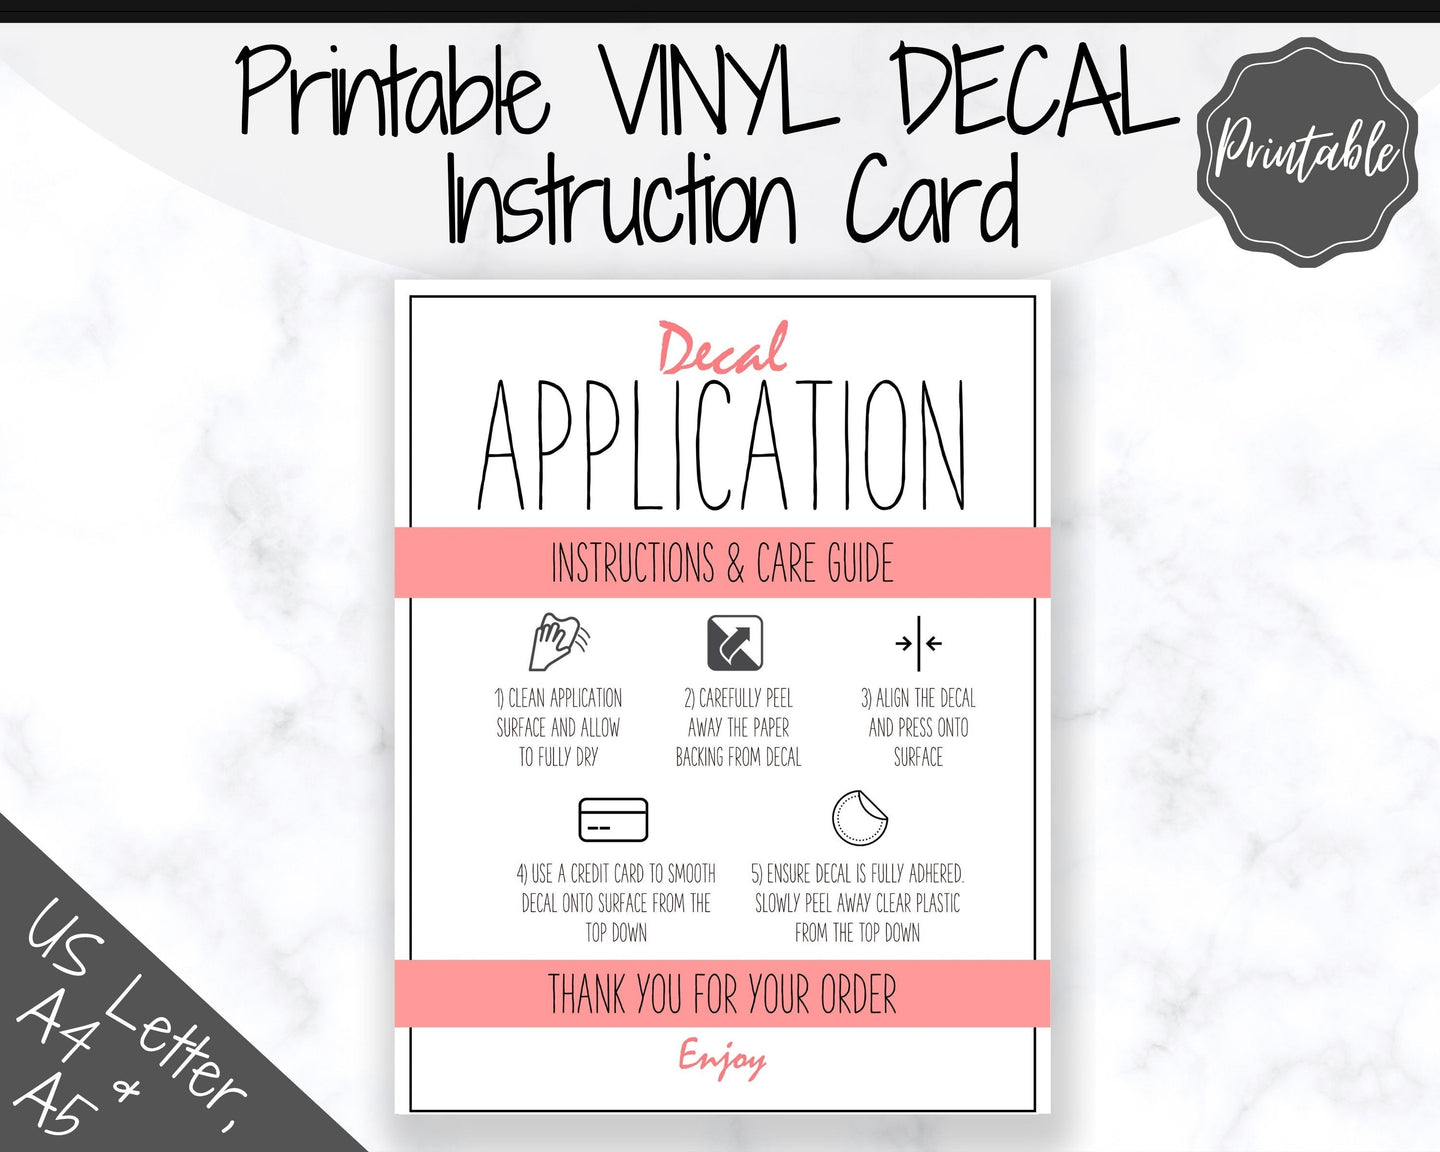 Printable Vinyl Decal Care Card Instructions. Decal Application Order Card, DIY Sticker Seller Packaging Label, Vinyl Decal Care Cards | Red